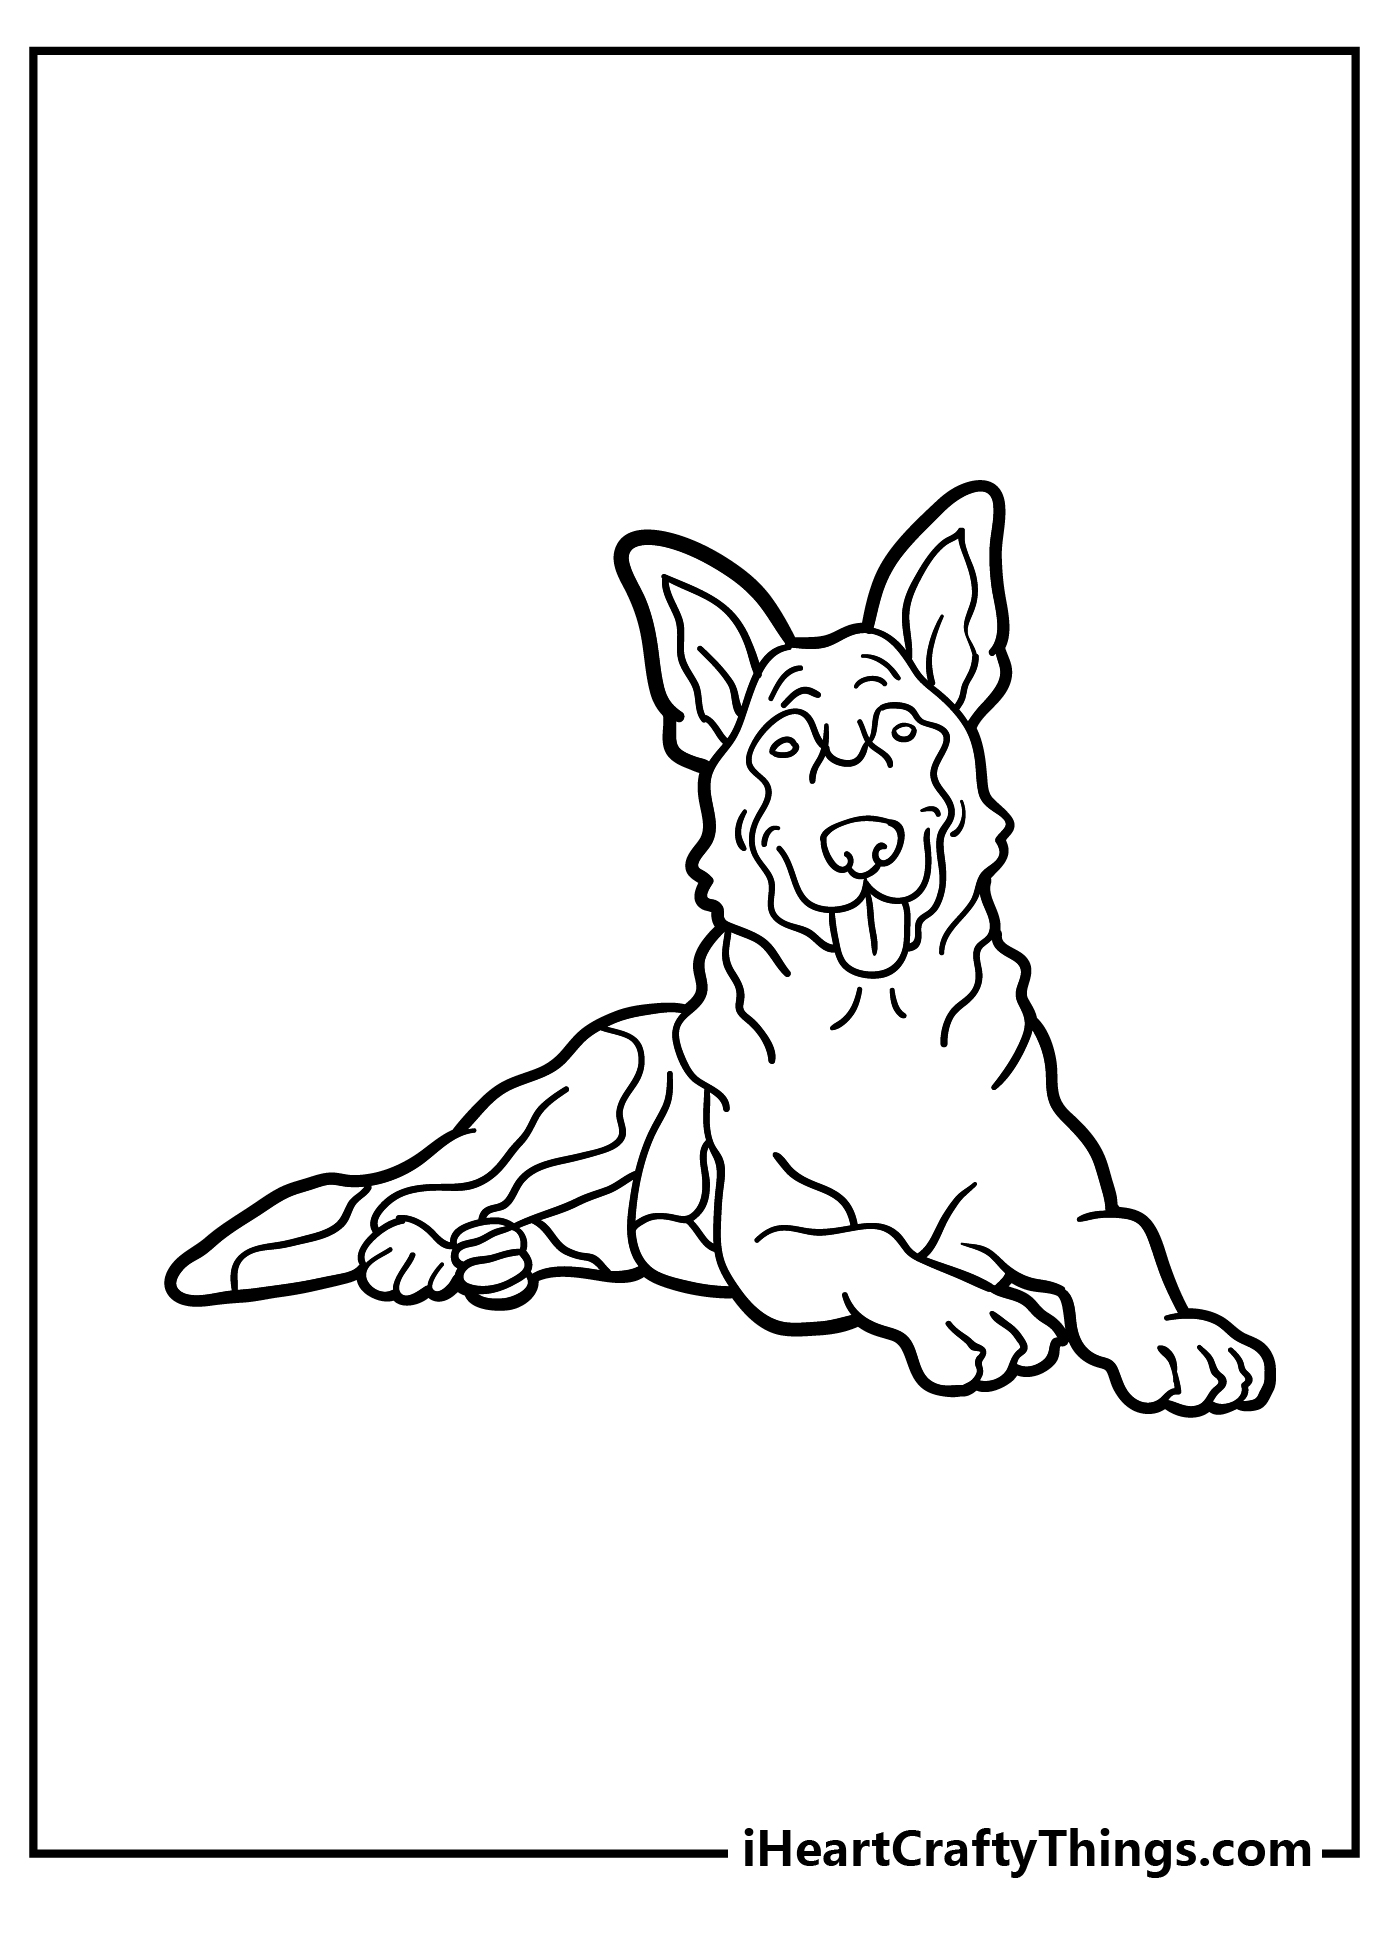 German Shepherd Coloring Book for adults free download